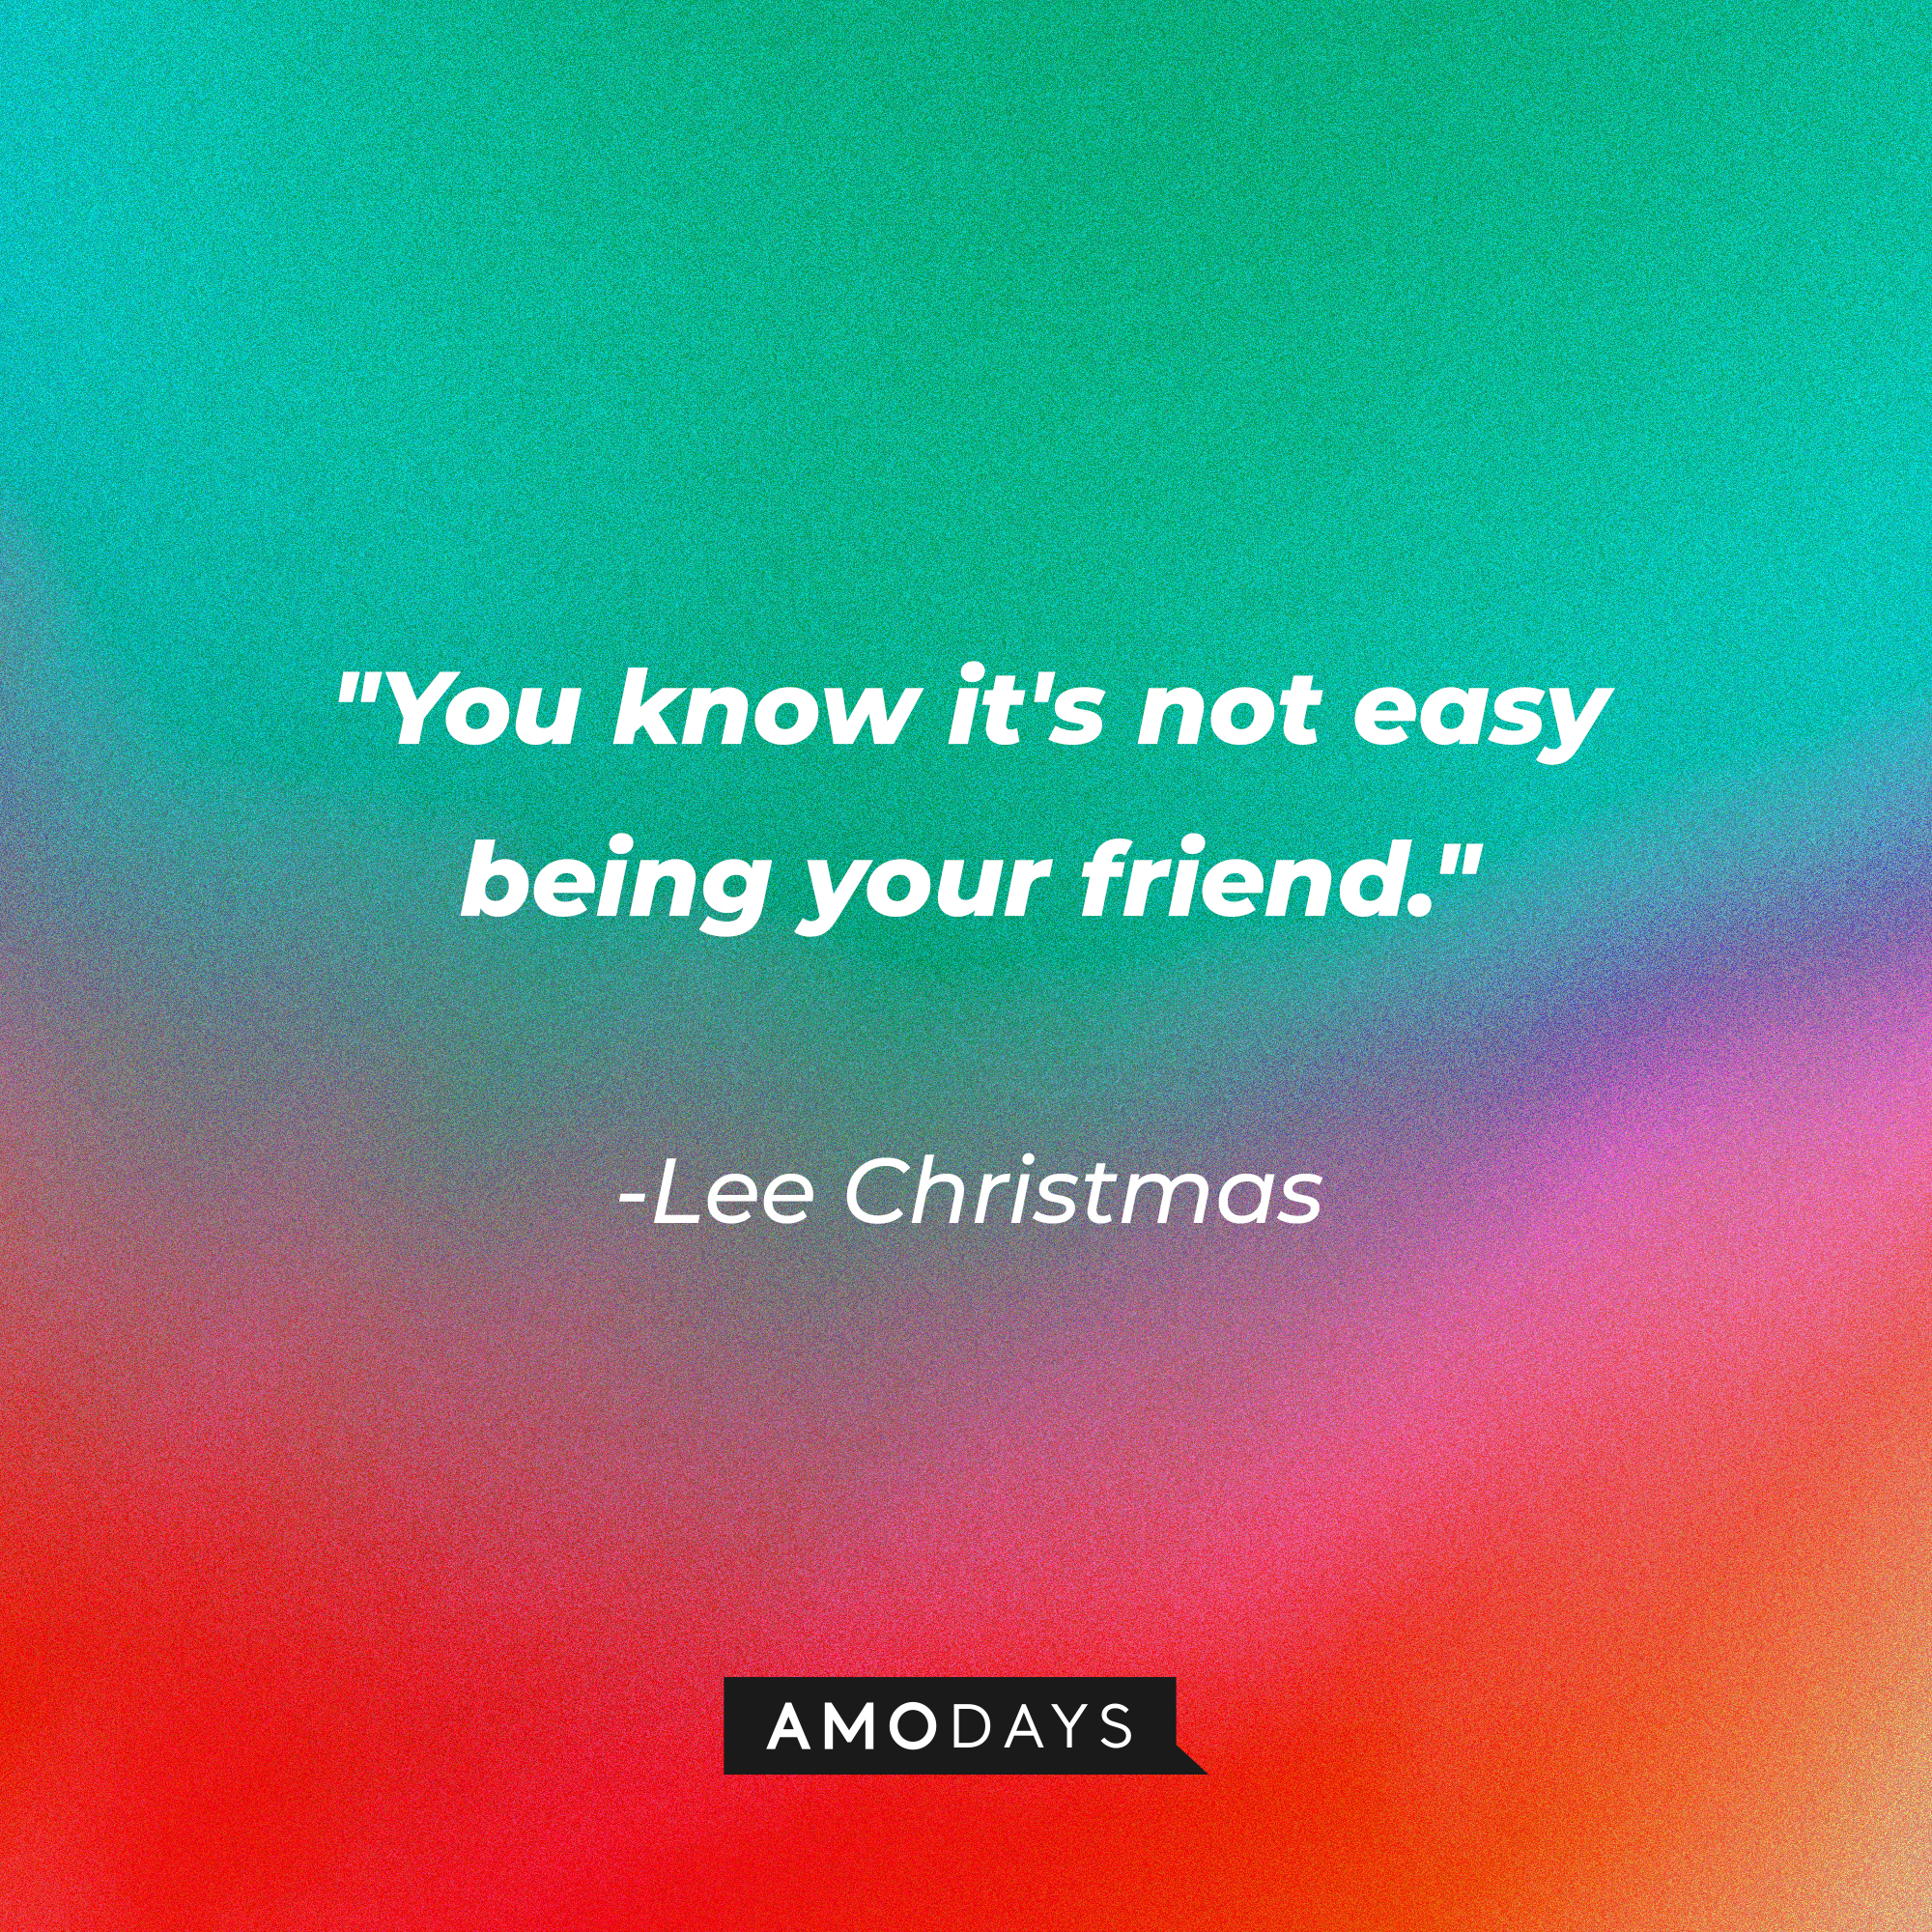 Lee Christmas’ quote: "You know it's not easy being your friend." | Source: AmoDays